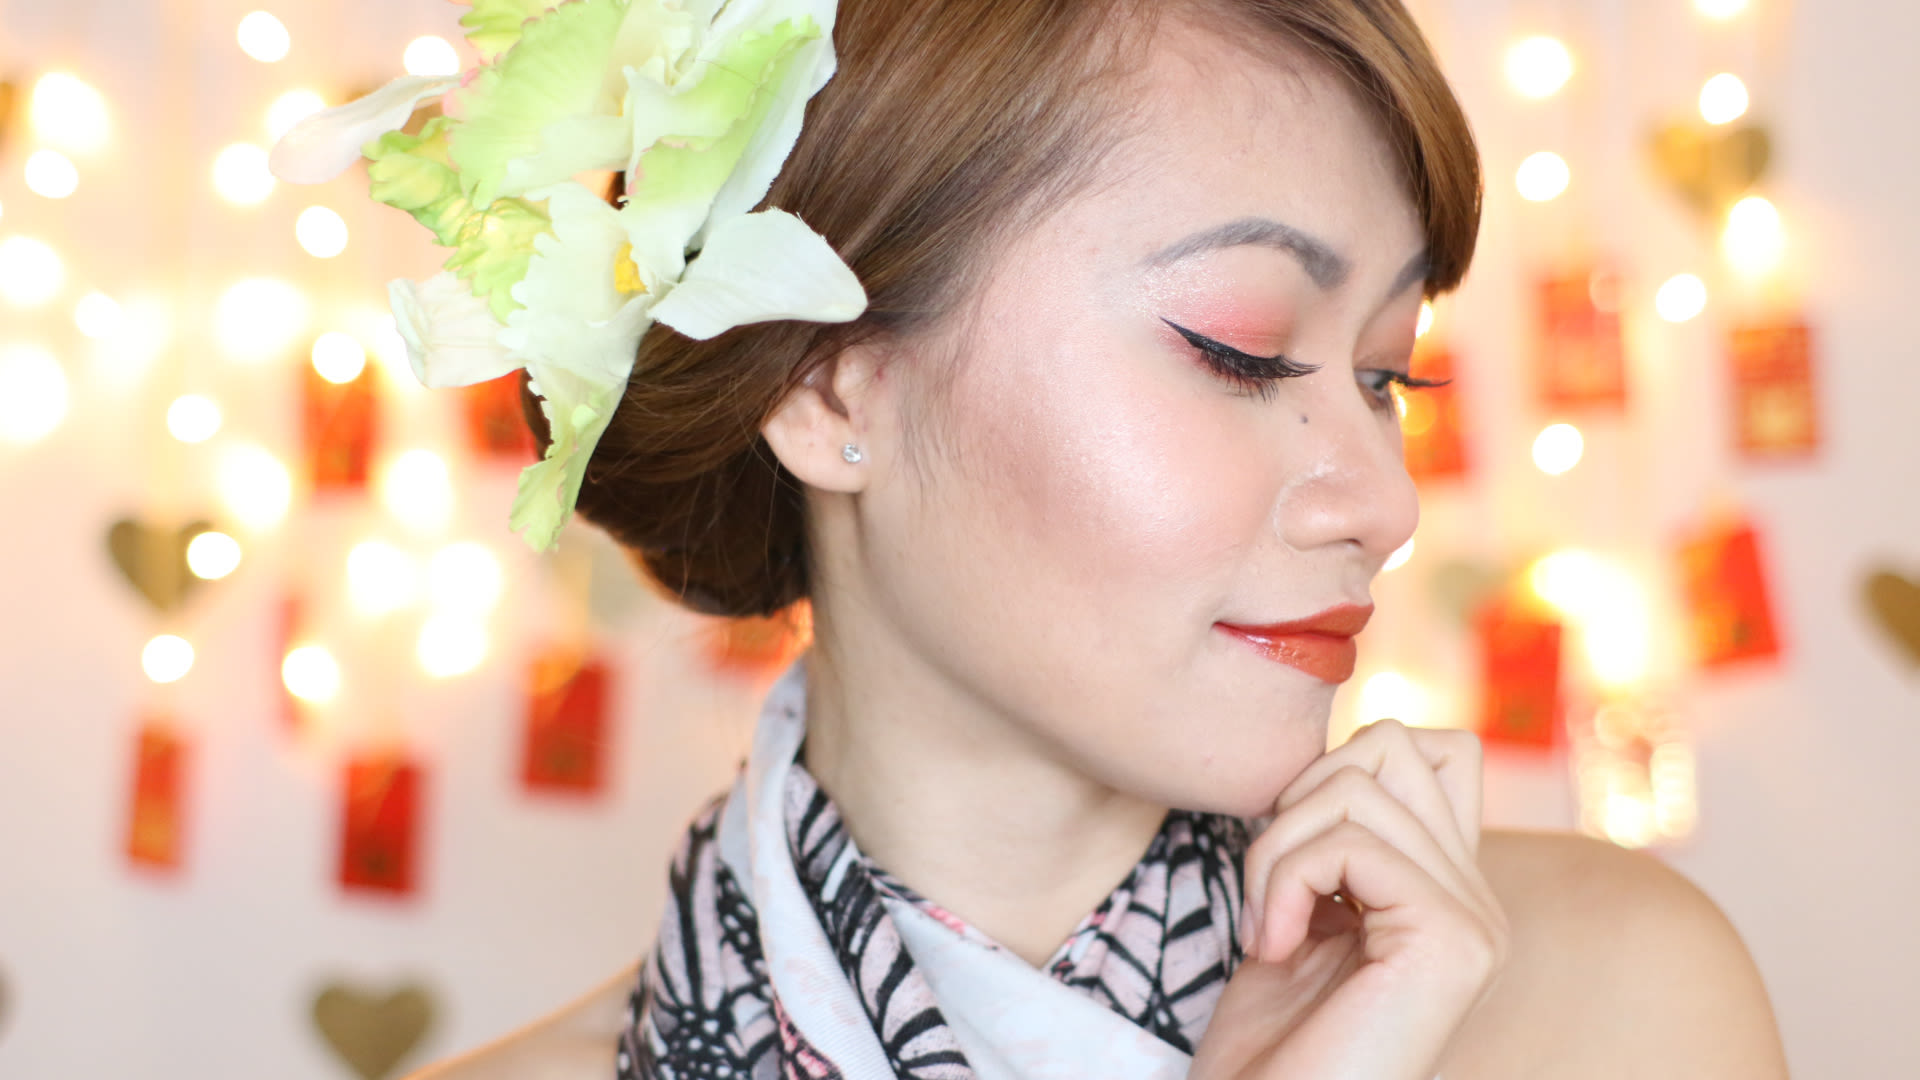 Watch New Year's Eve Party Makeup, Allure Insiders